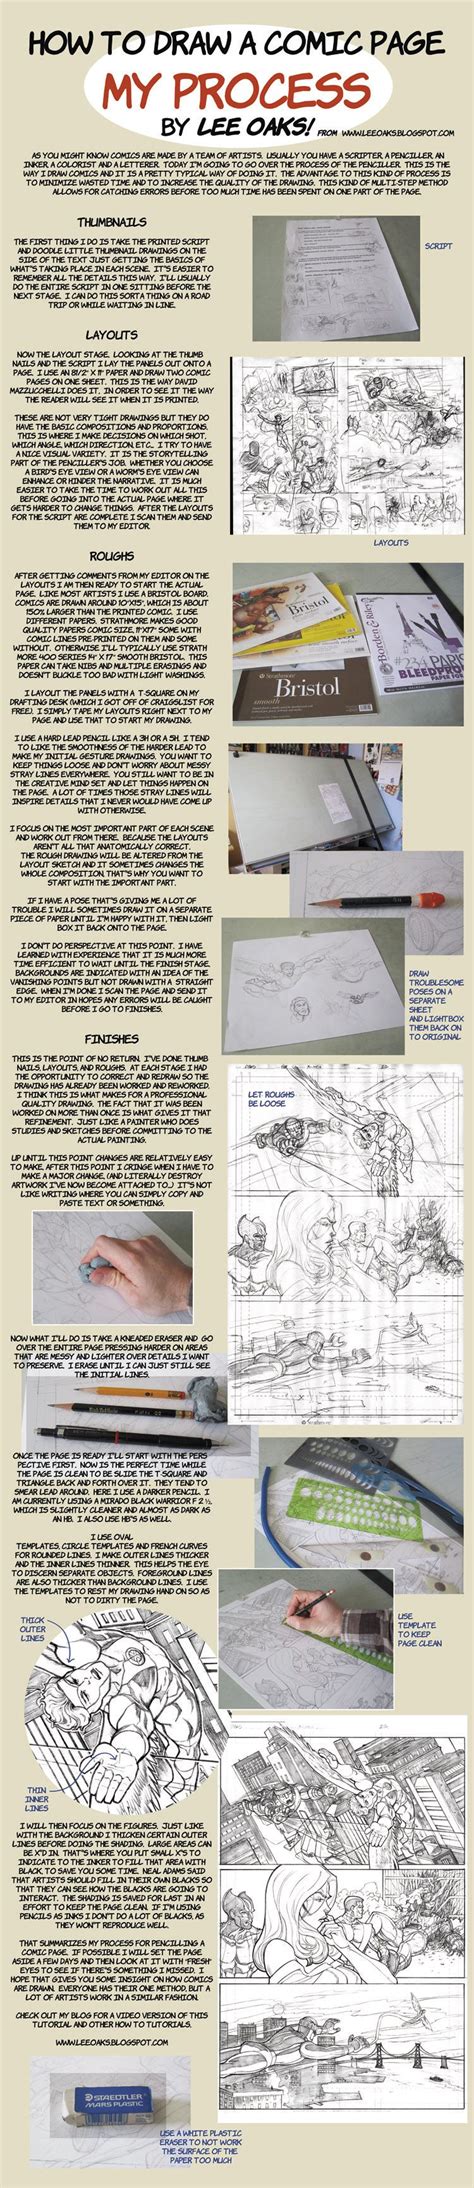 An Article About How To Draw A Comic Page